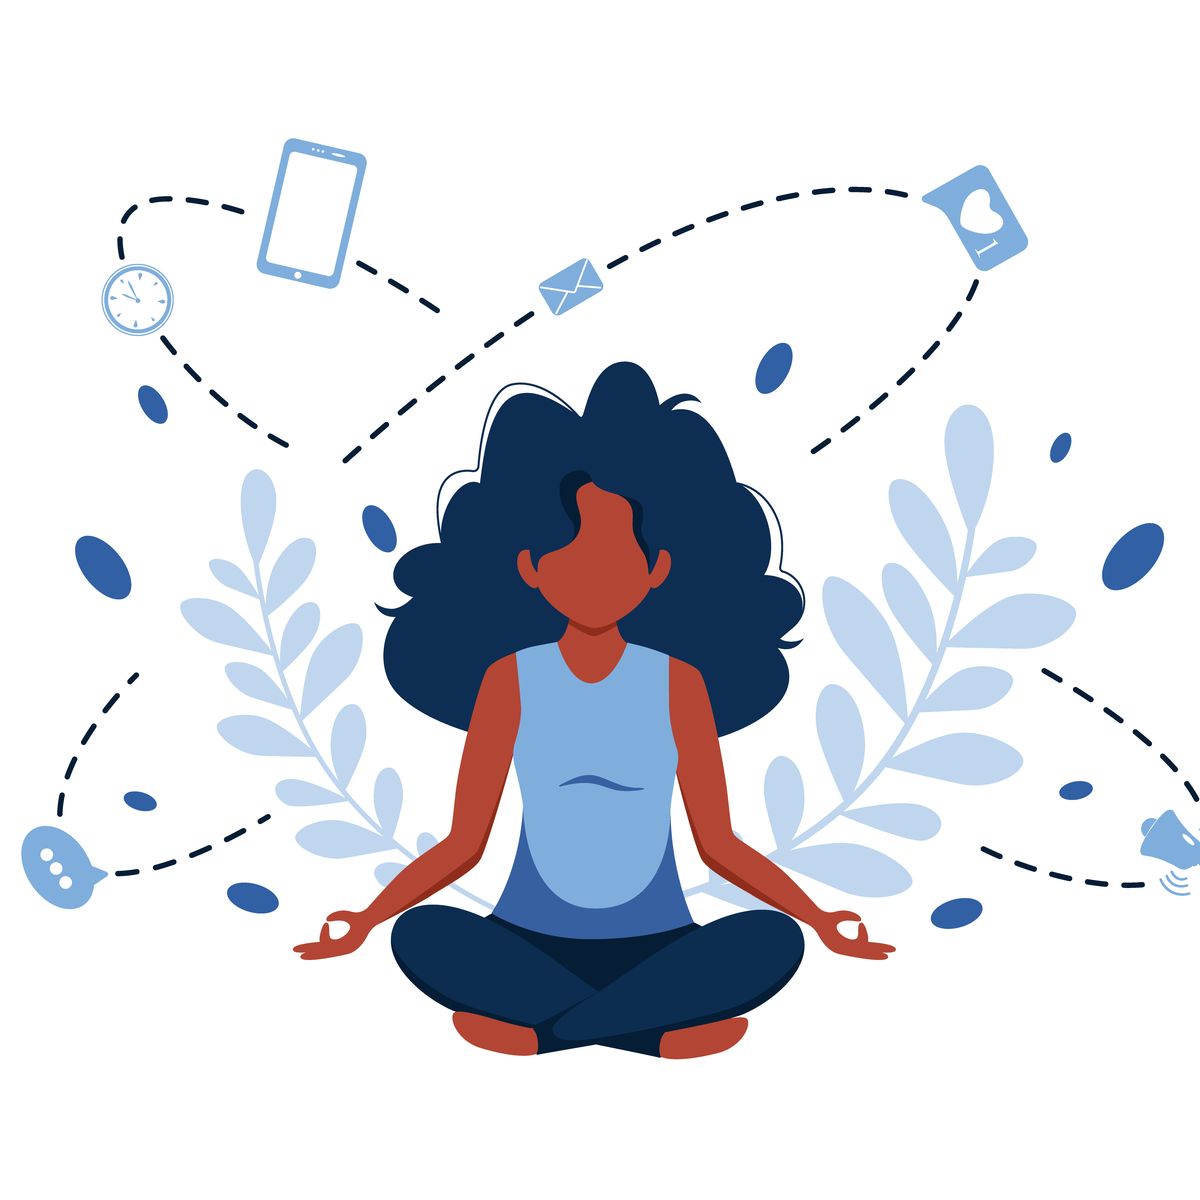 illustrated woman meditating with cell phones orbiting her head